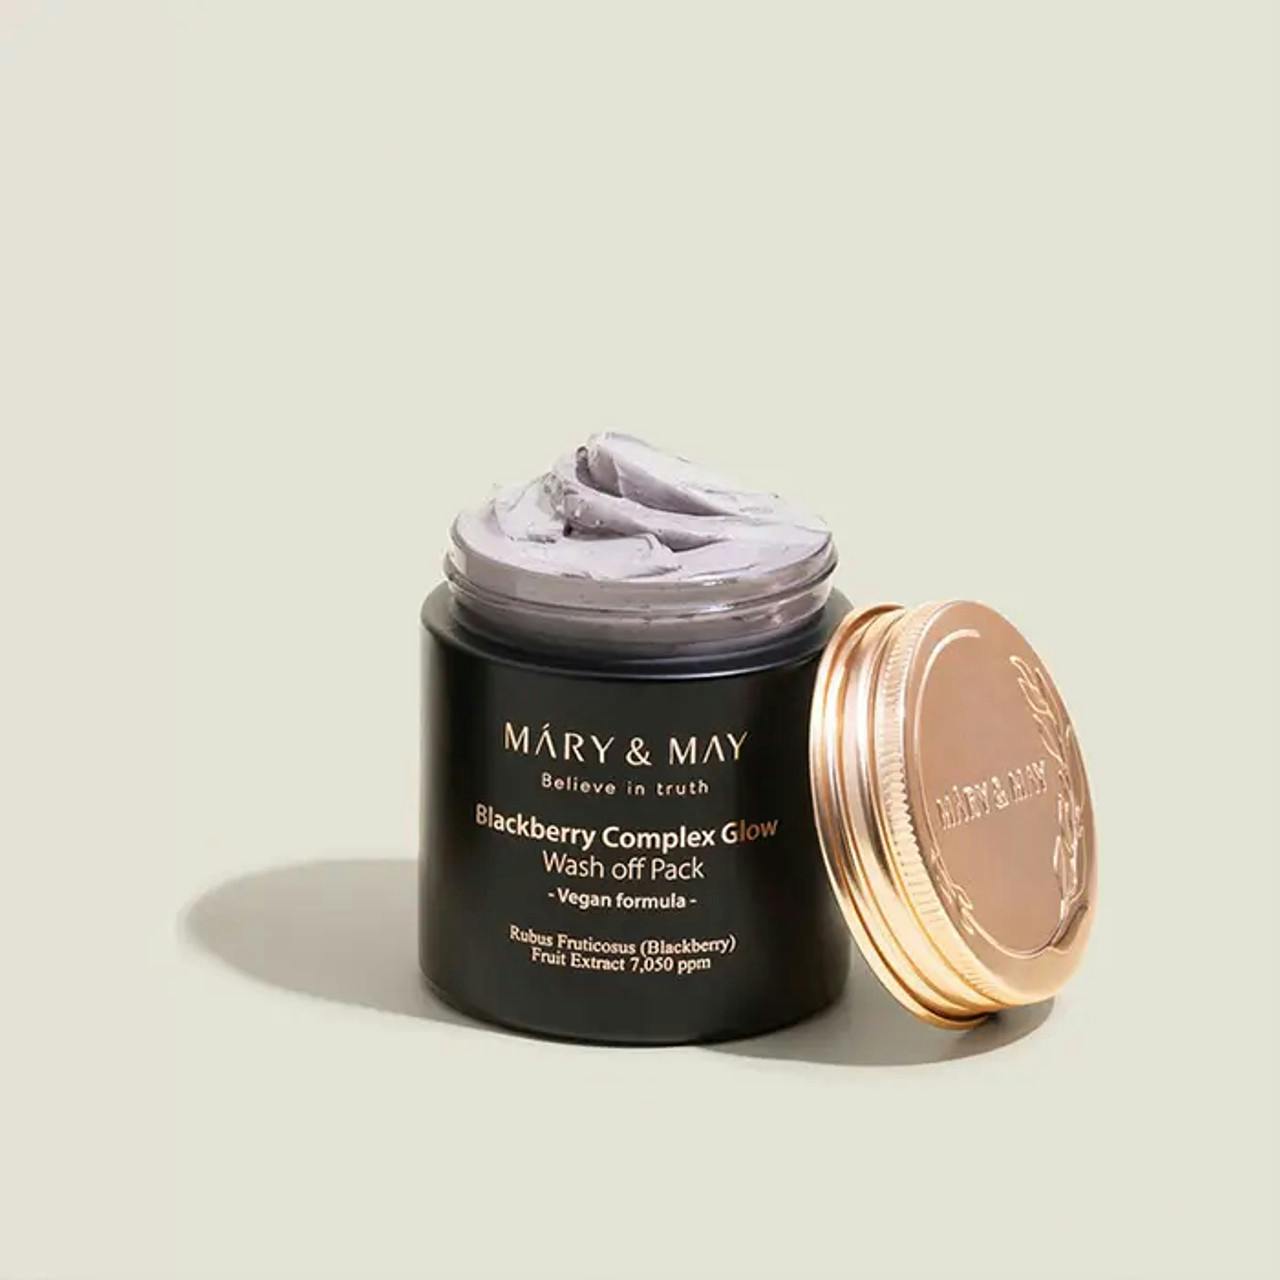 Mary & May Blackberry Complex Glow Wash Off Mask 